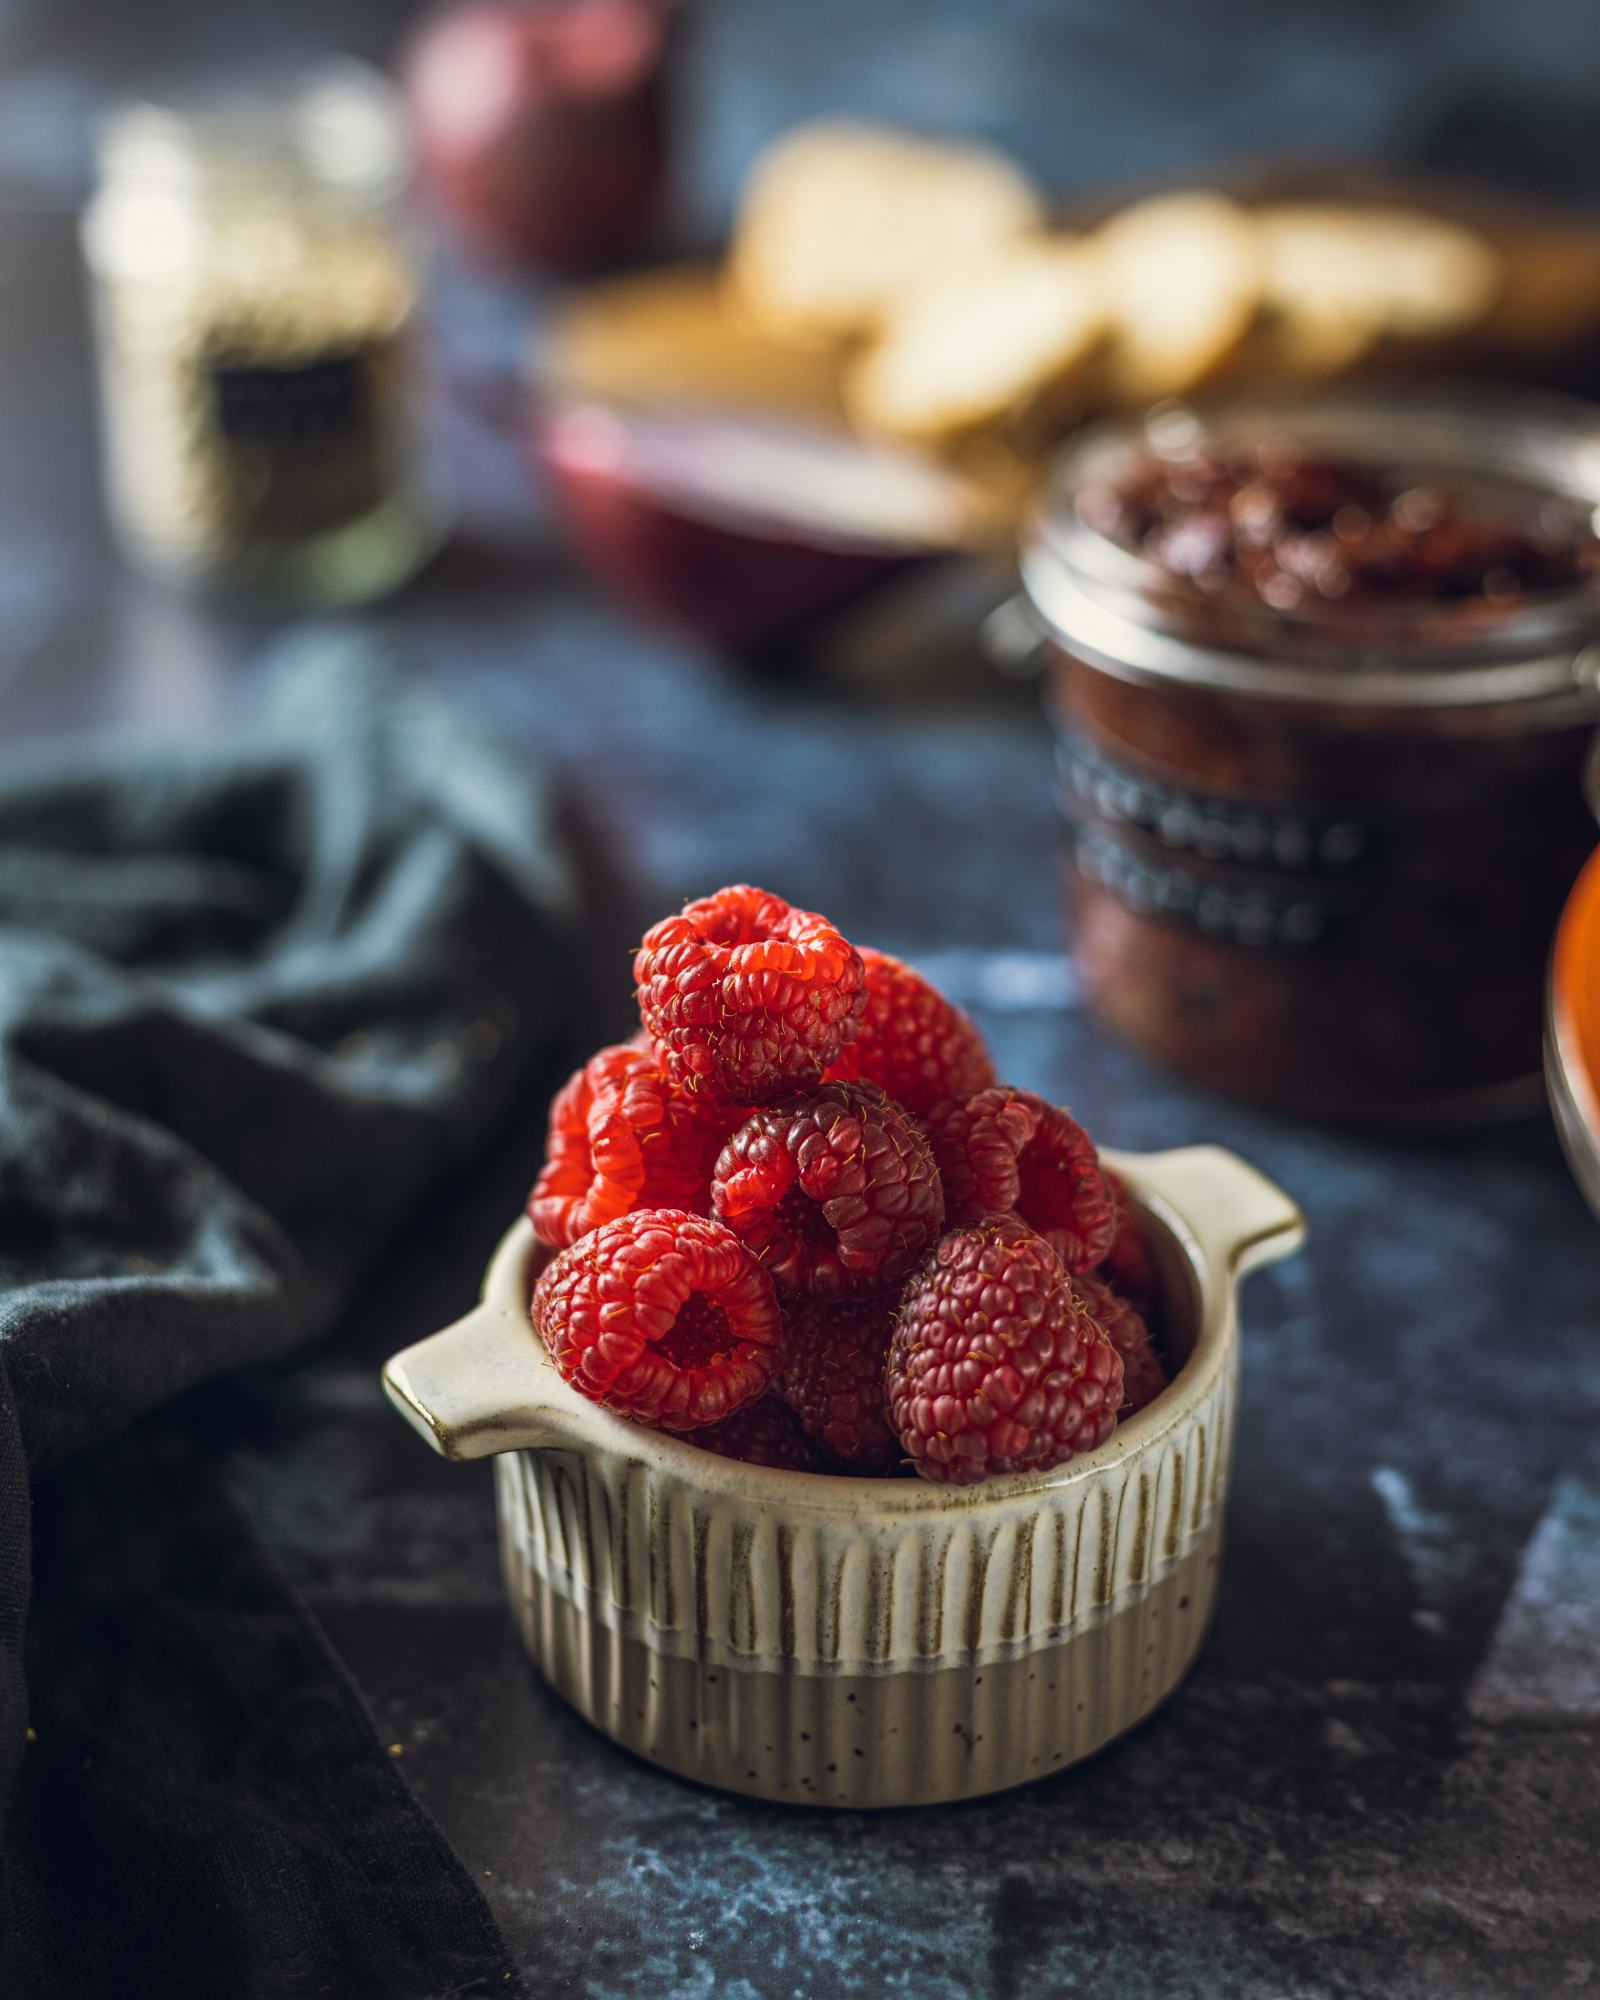 A small bowl filled with fresh raspberries with the chutney in the background.